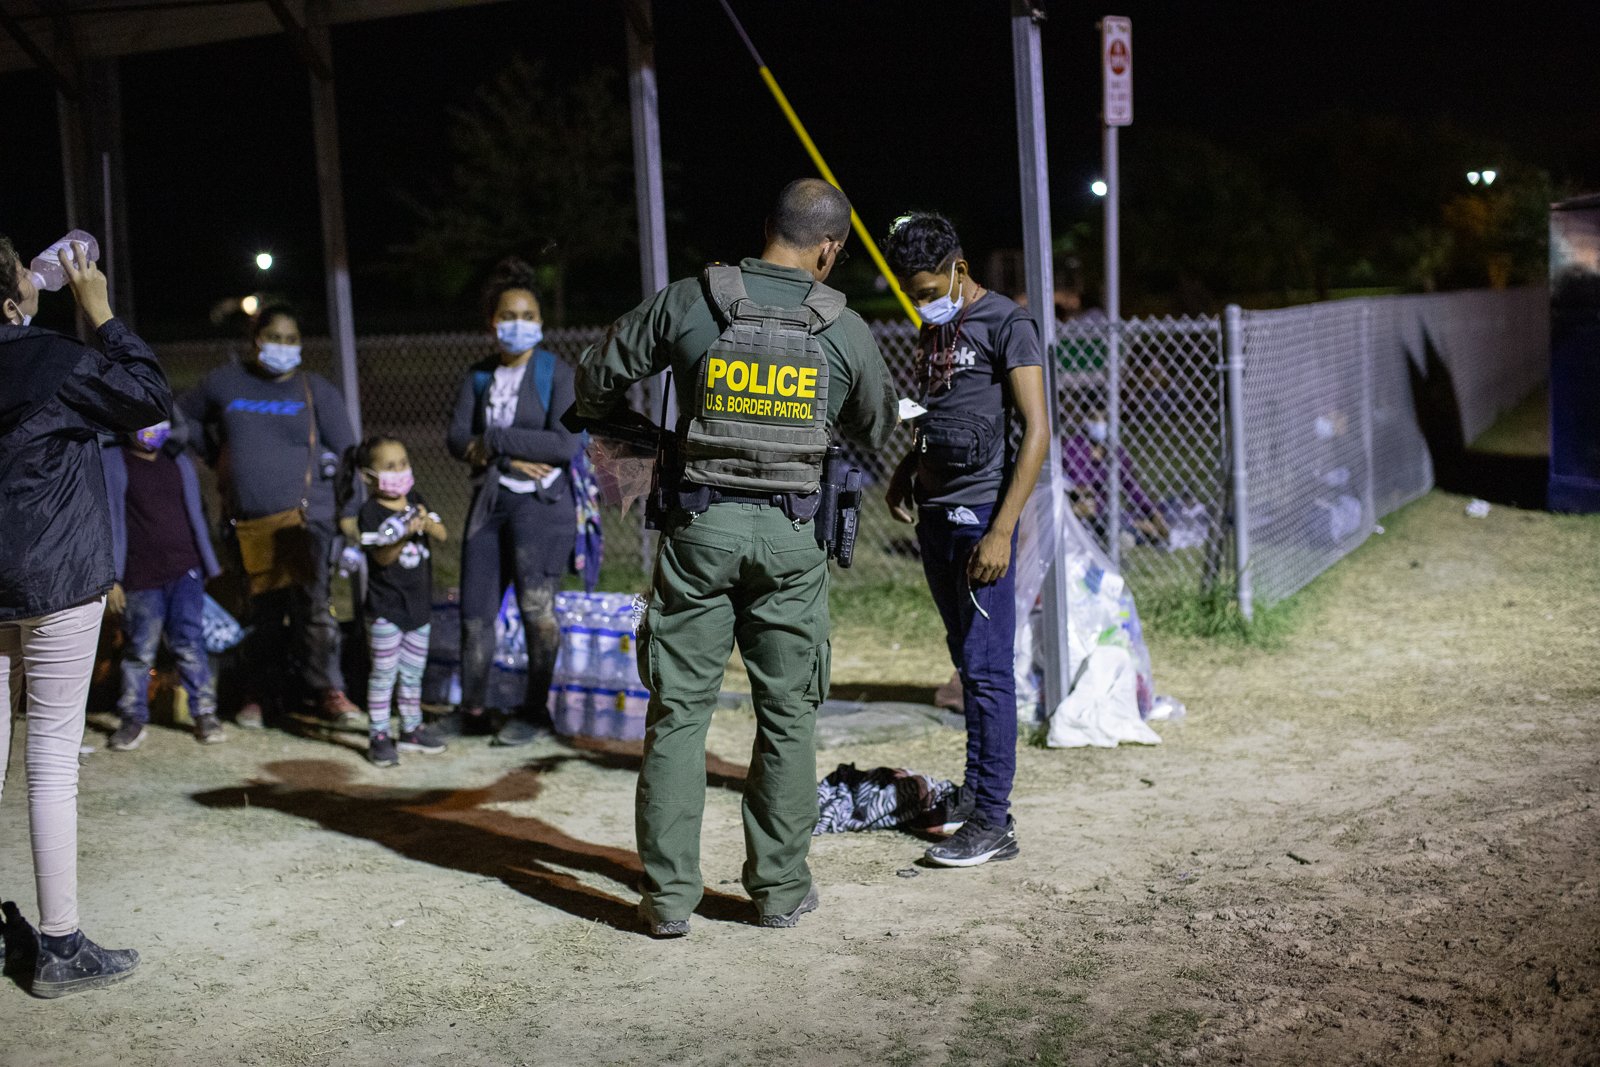 Border officials processed around 100 migrants who surrendered in smaller groups near La Joya, Texas on August 7, 2021. (Kaylee Greenlee - Daily Caller News Foundation)